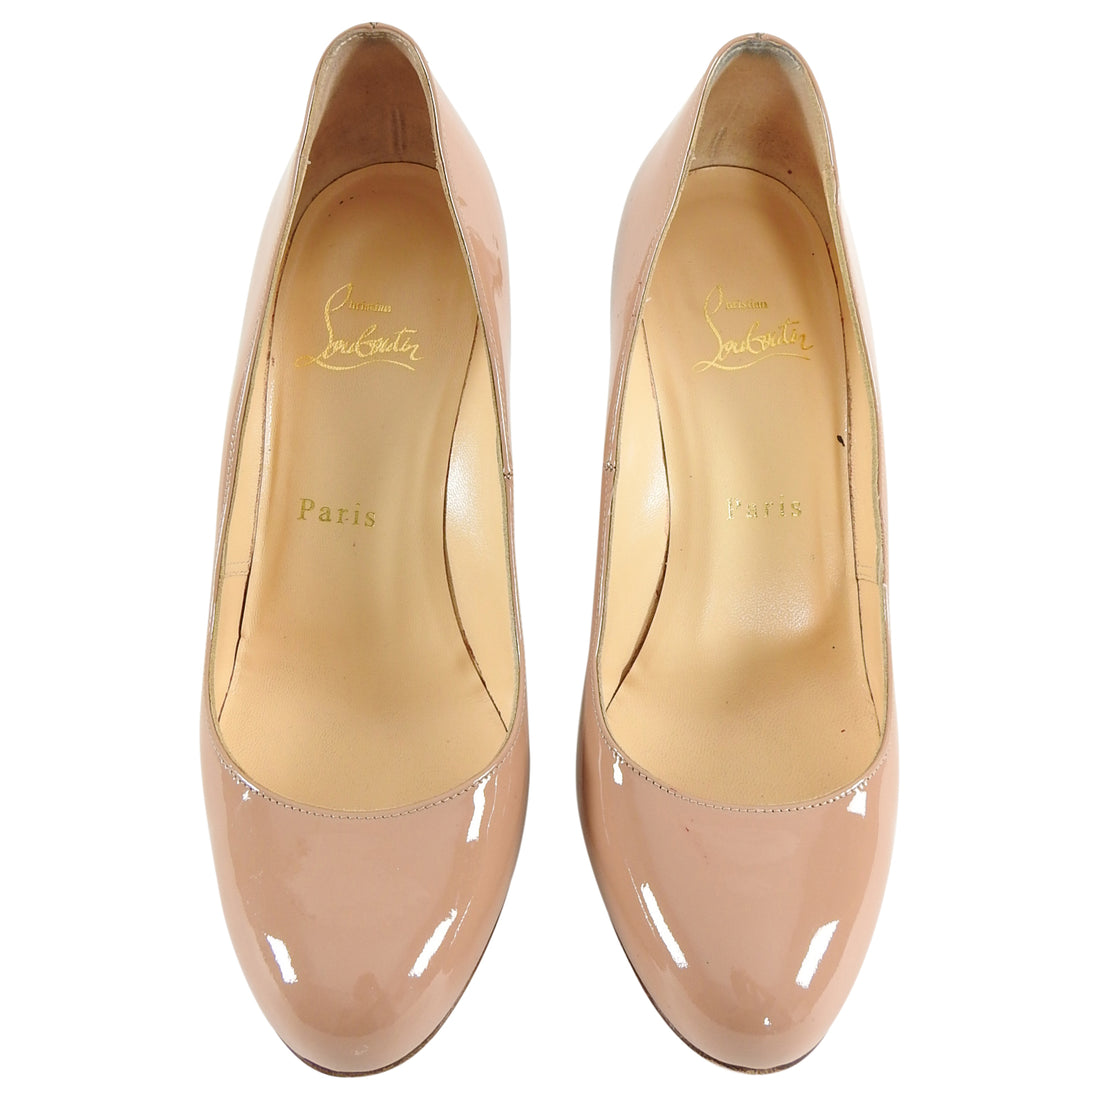 Christian Louboutin Nude Patent Ron Ron Zeppa Wedge Pumps